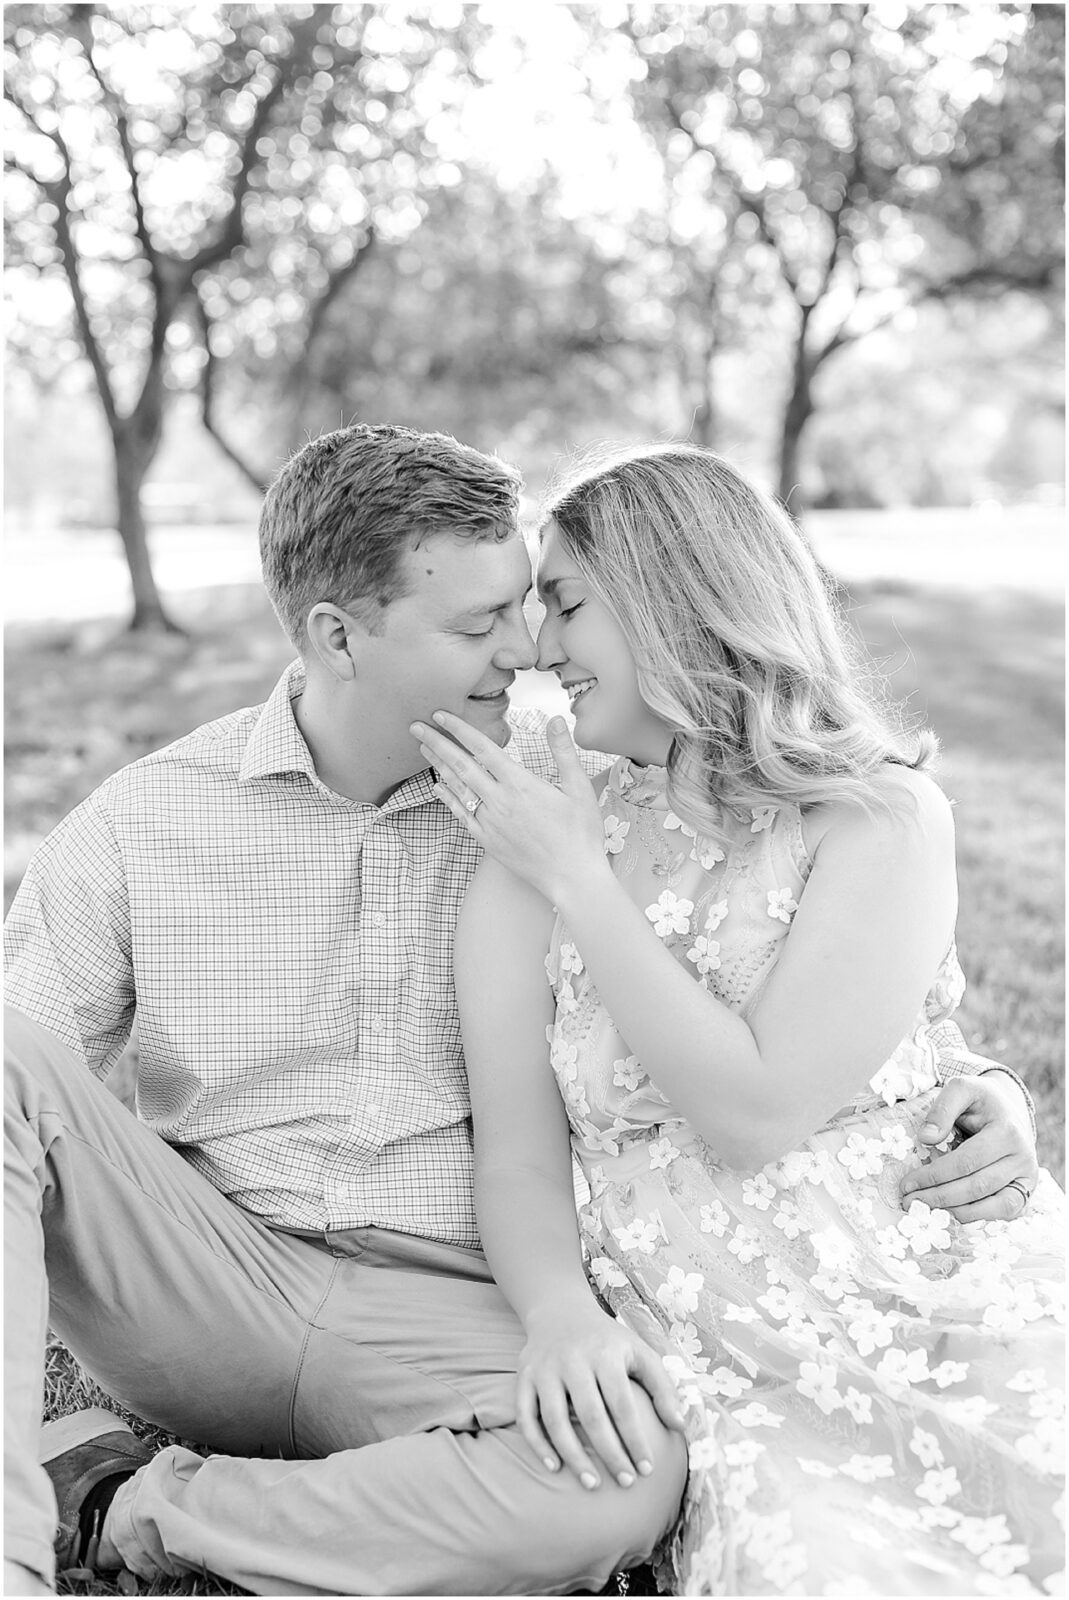 black and white lovely photos

Kansas City and Olathe and Overland Park Kansas - Engagement Photos - Engagement Session - Pink Trees - Spring Pink Flowers Wedding Photos